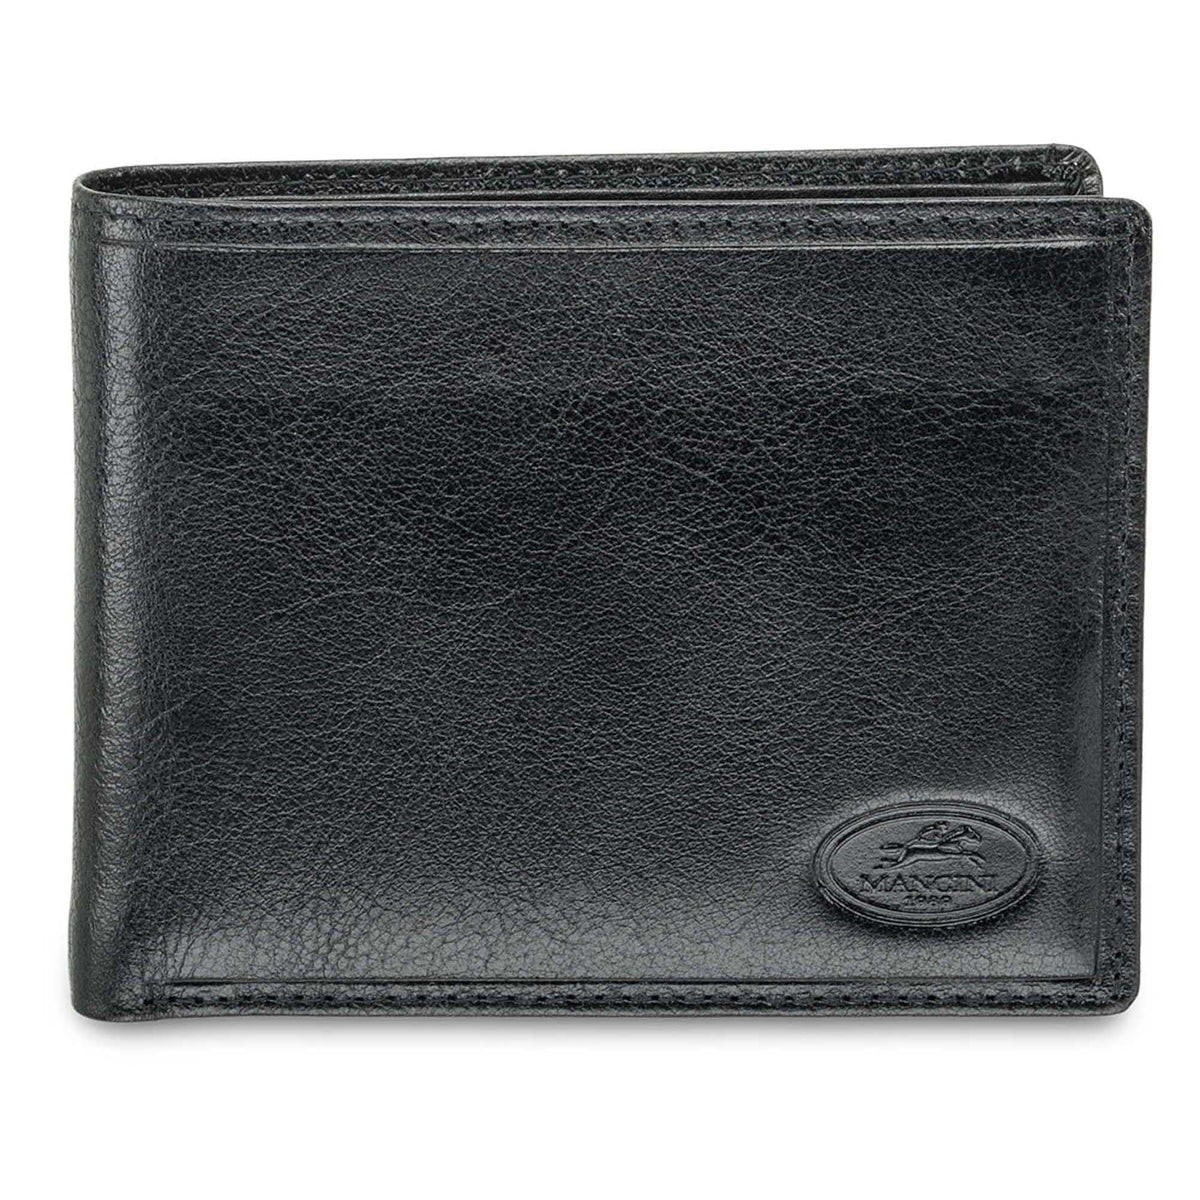 Mancini Equestrian2 RFID Billfold with Removable Left Wing Passcase and Coin Pocket